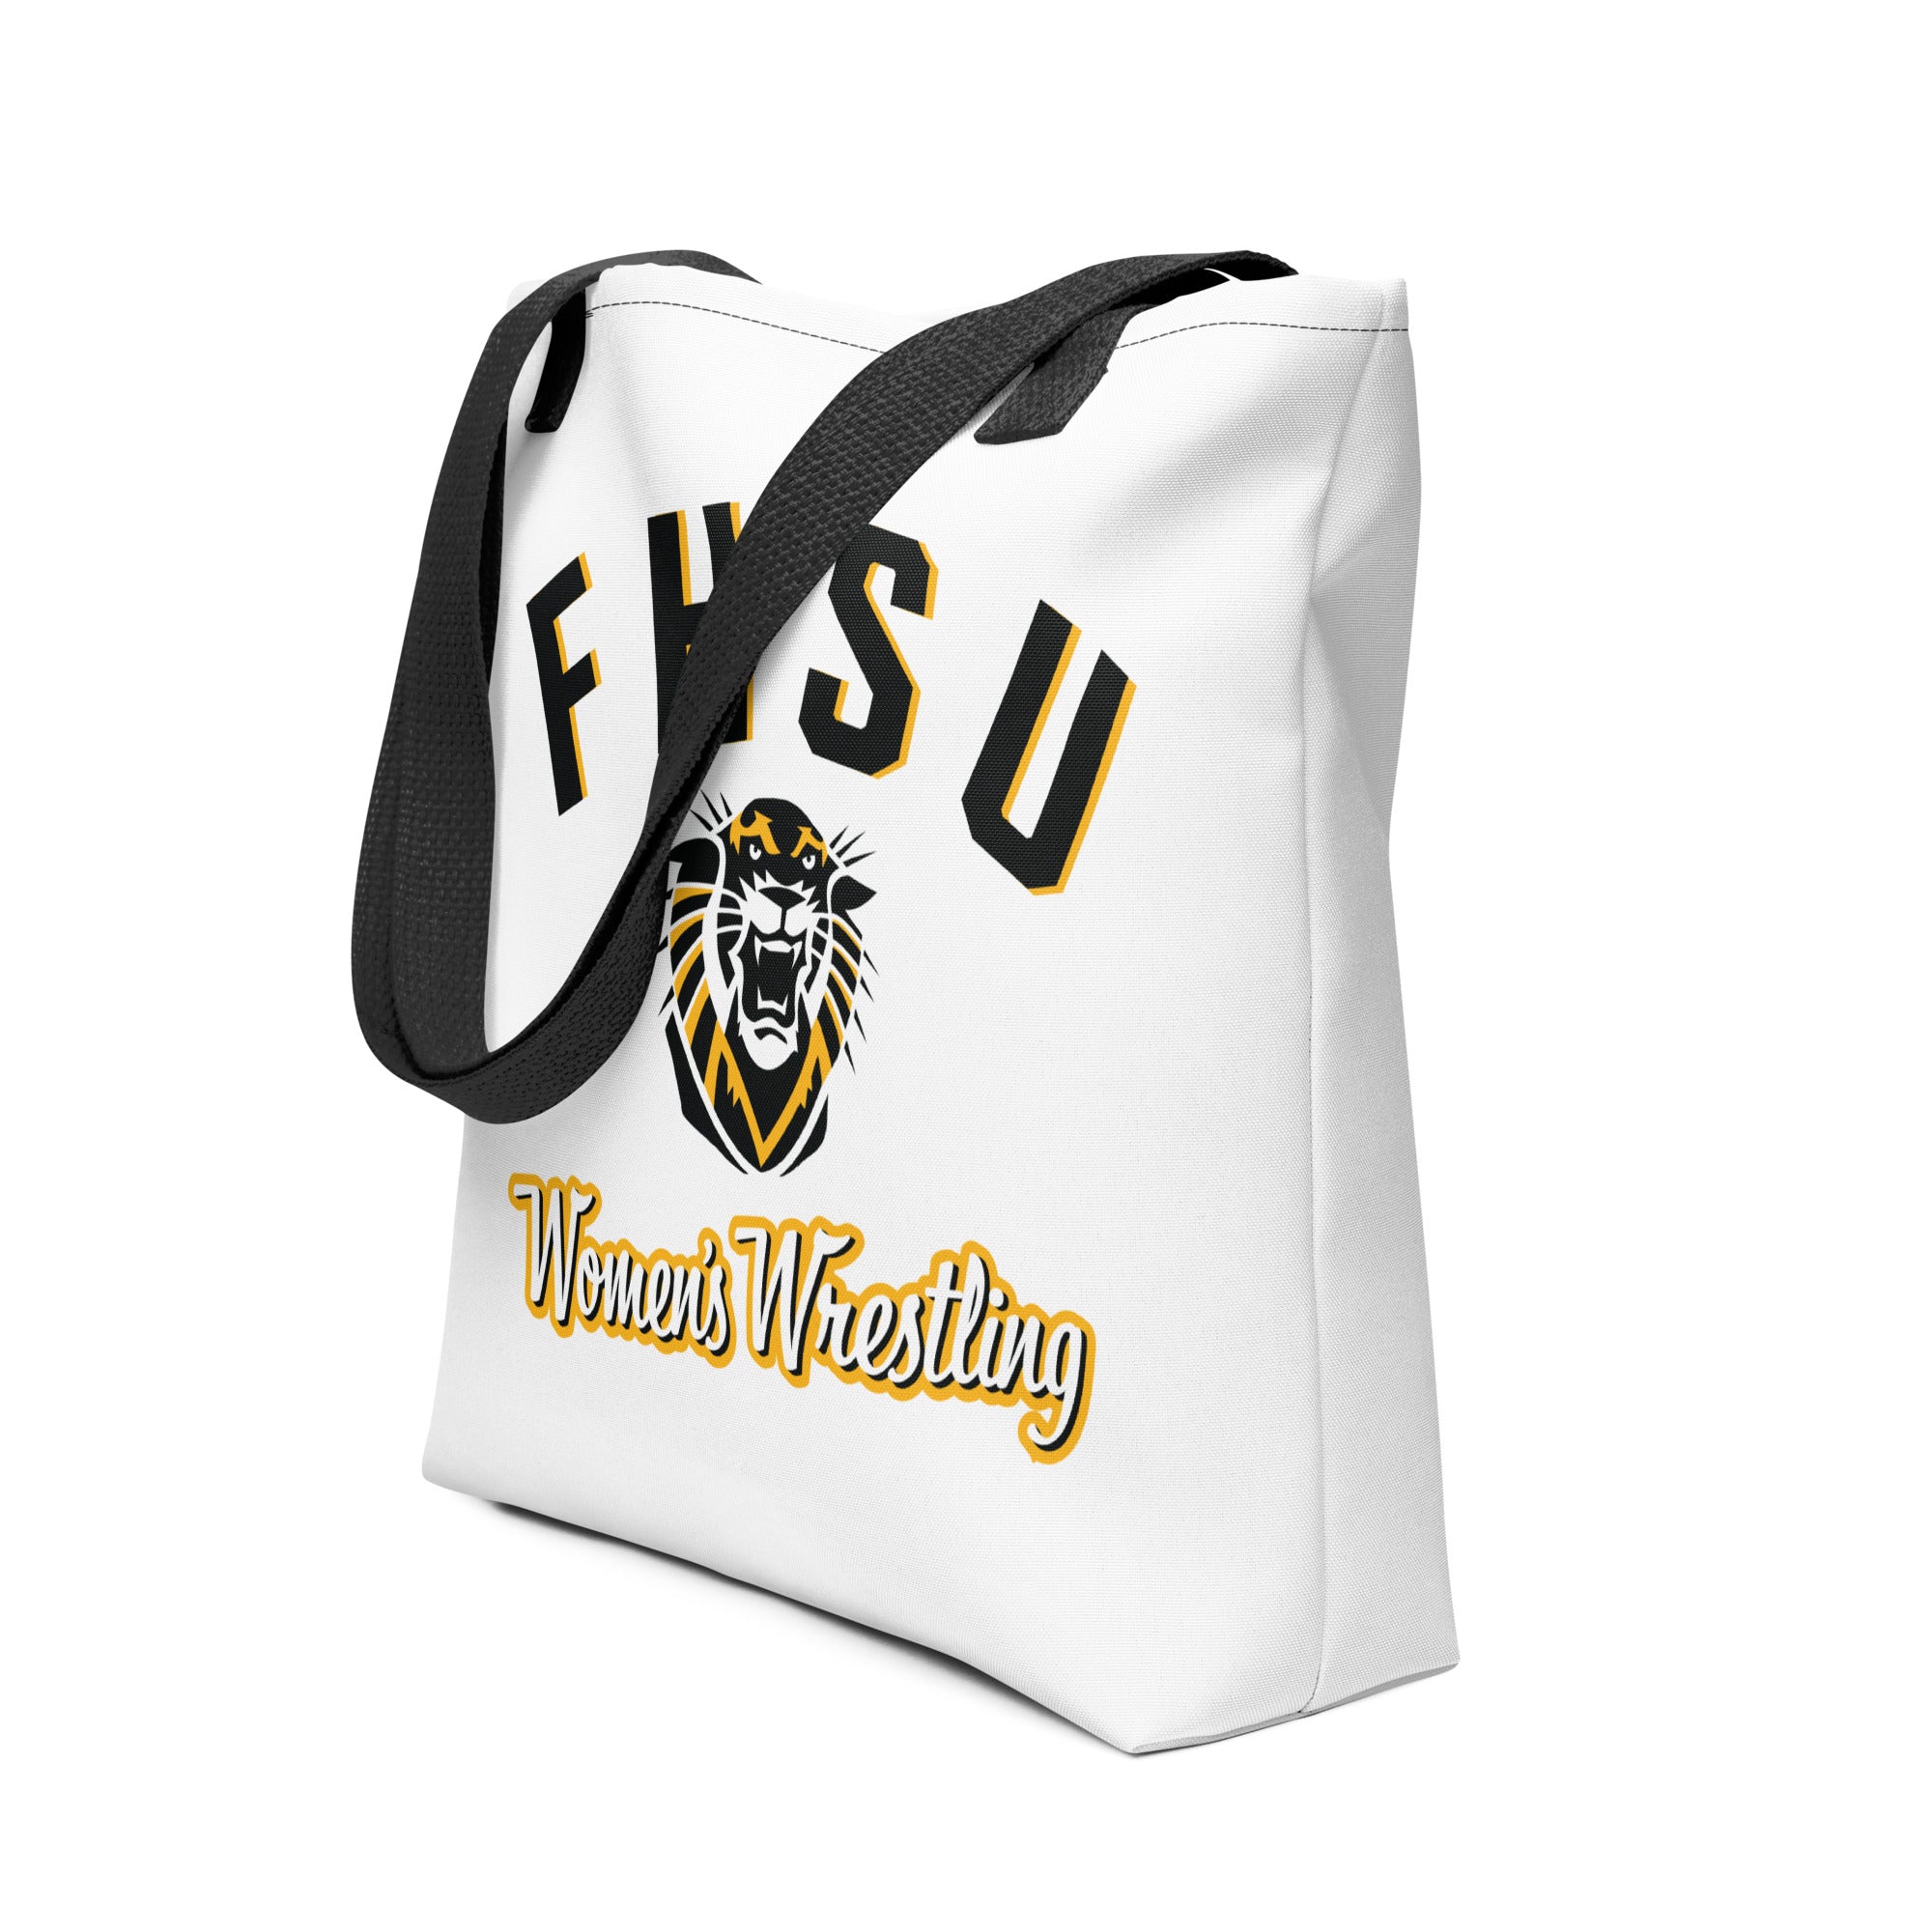 Fort Hays Women's Wrestling Grey All-Over Print Tote